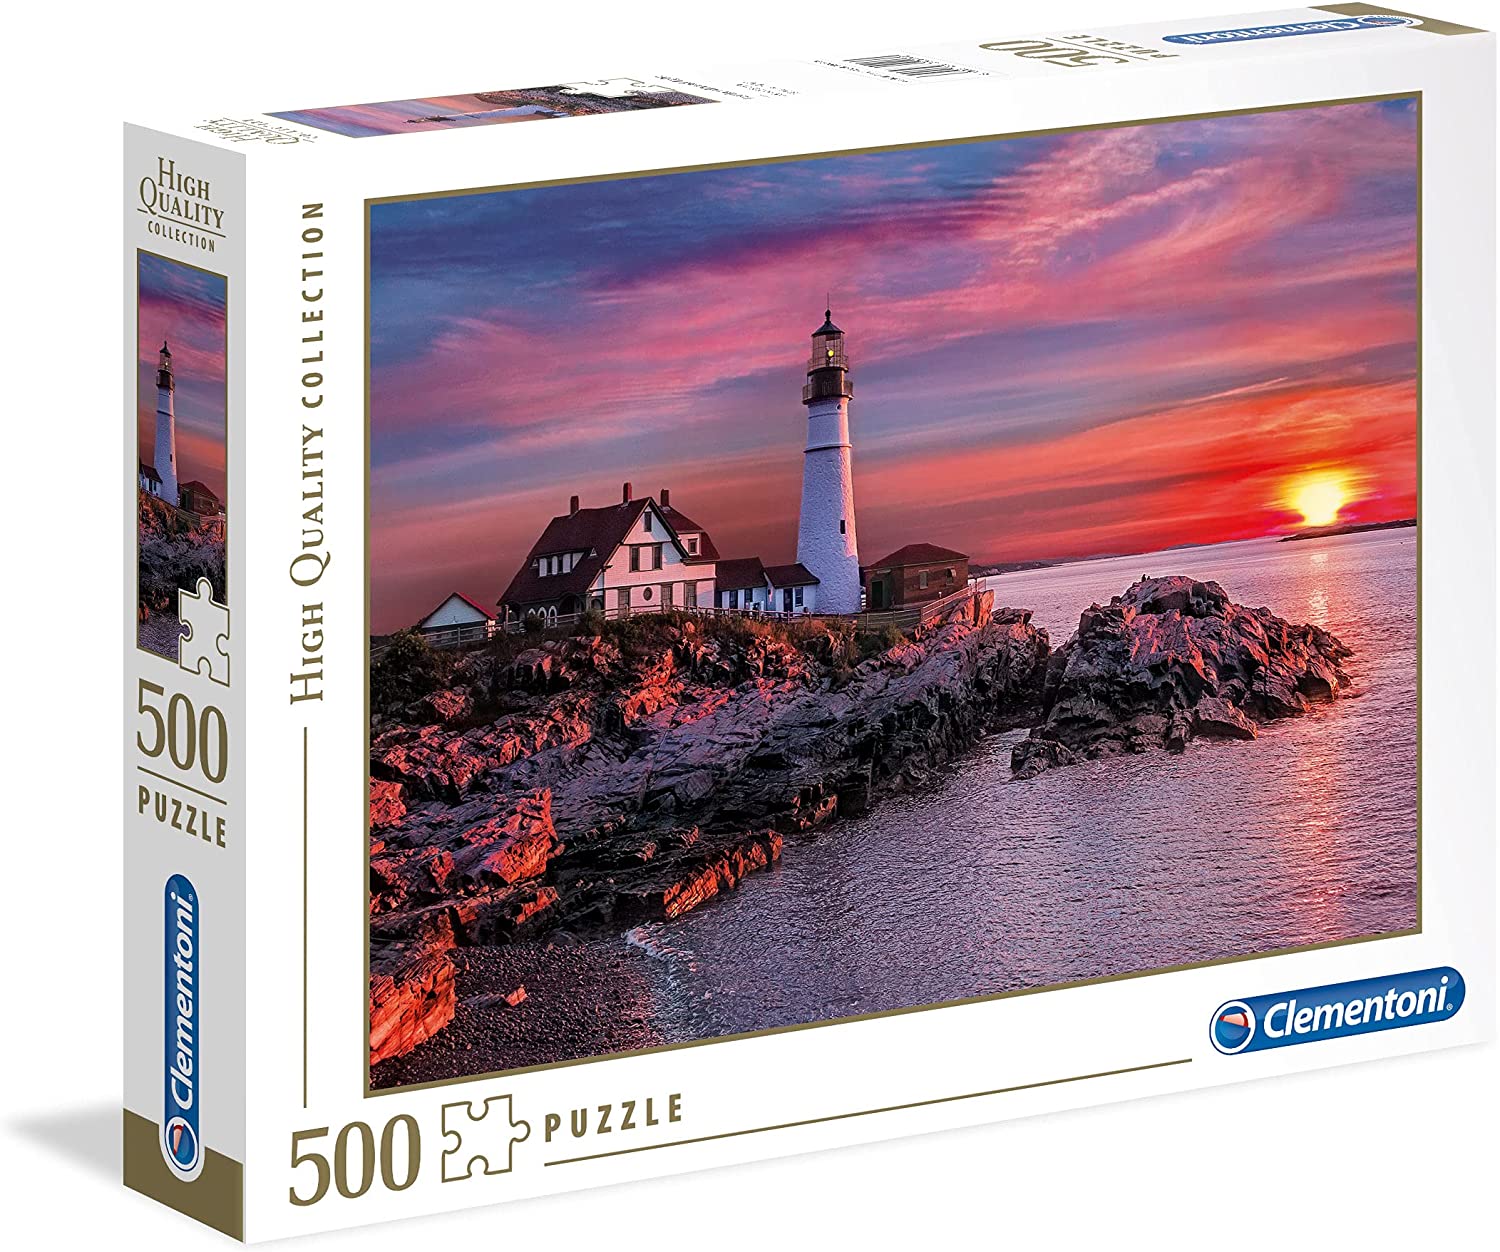 CLEMENTONI - BOARD GAME 500PC - HIGH QUALITY COLLECTION - PUZZLE - MOD: CLM35049